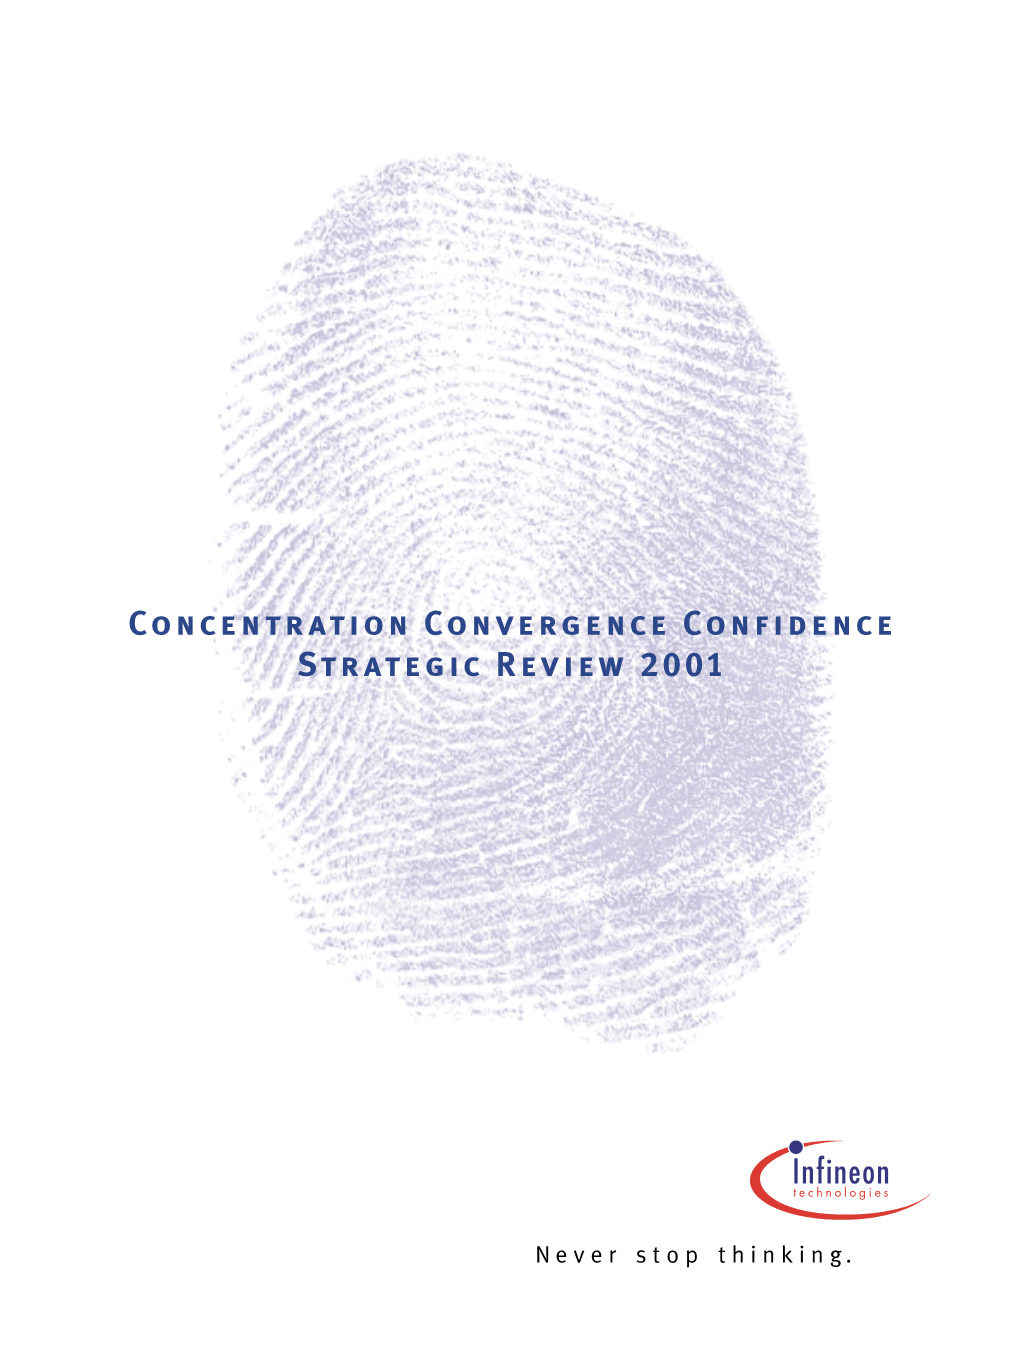 Concentration Convergence Confidence Strategic Review 2001 [Concentration Convergence Confidence]